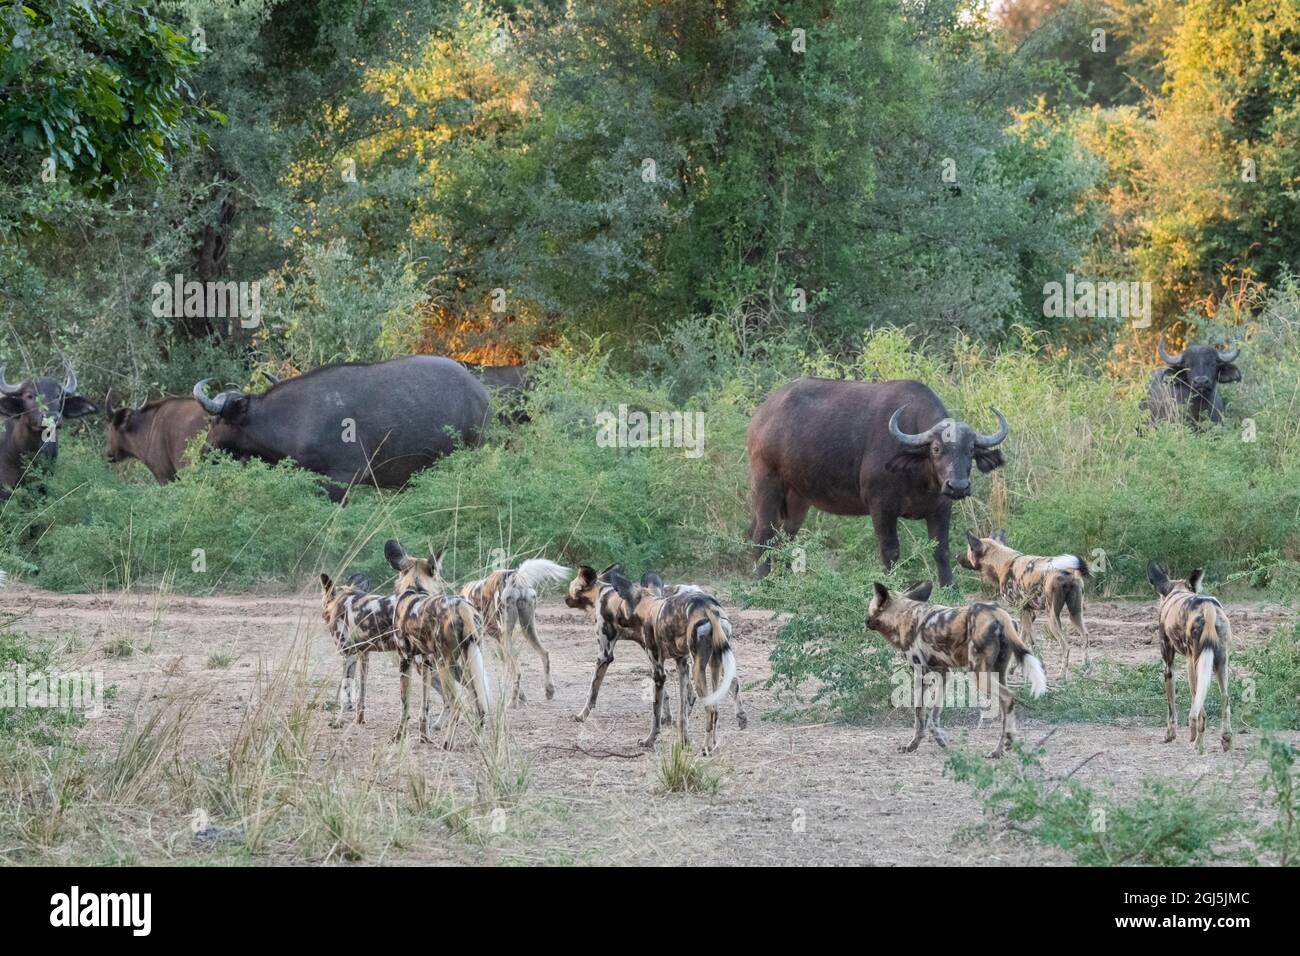 Africa, Zambia, South Luangwa National Park. Pack of African Painted Wolves, aka Painted Dogs or African Wild Dog, hunting Cape buffalo. Stock Photo